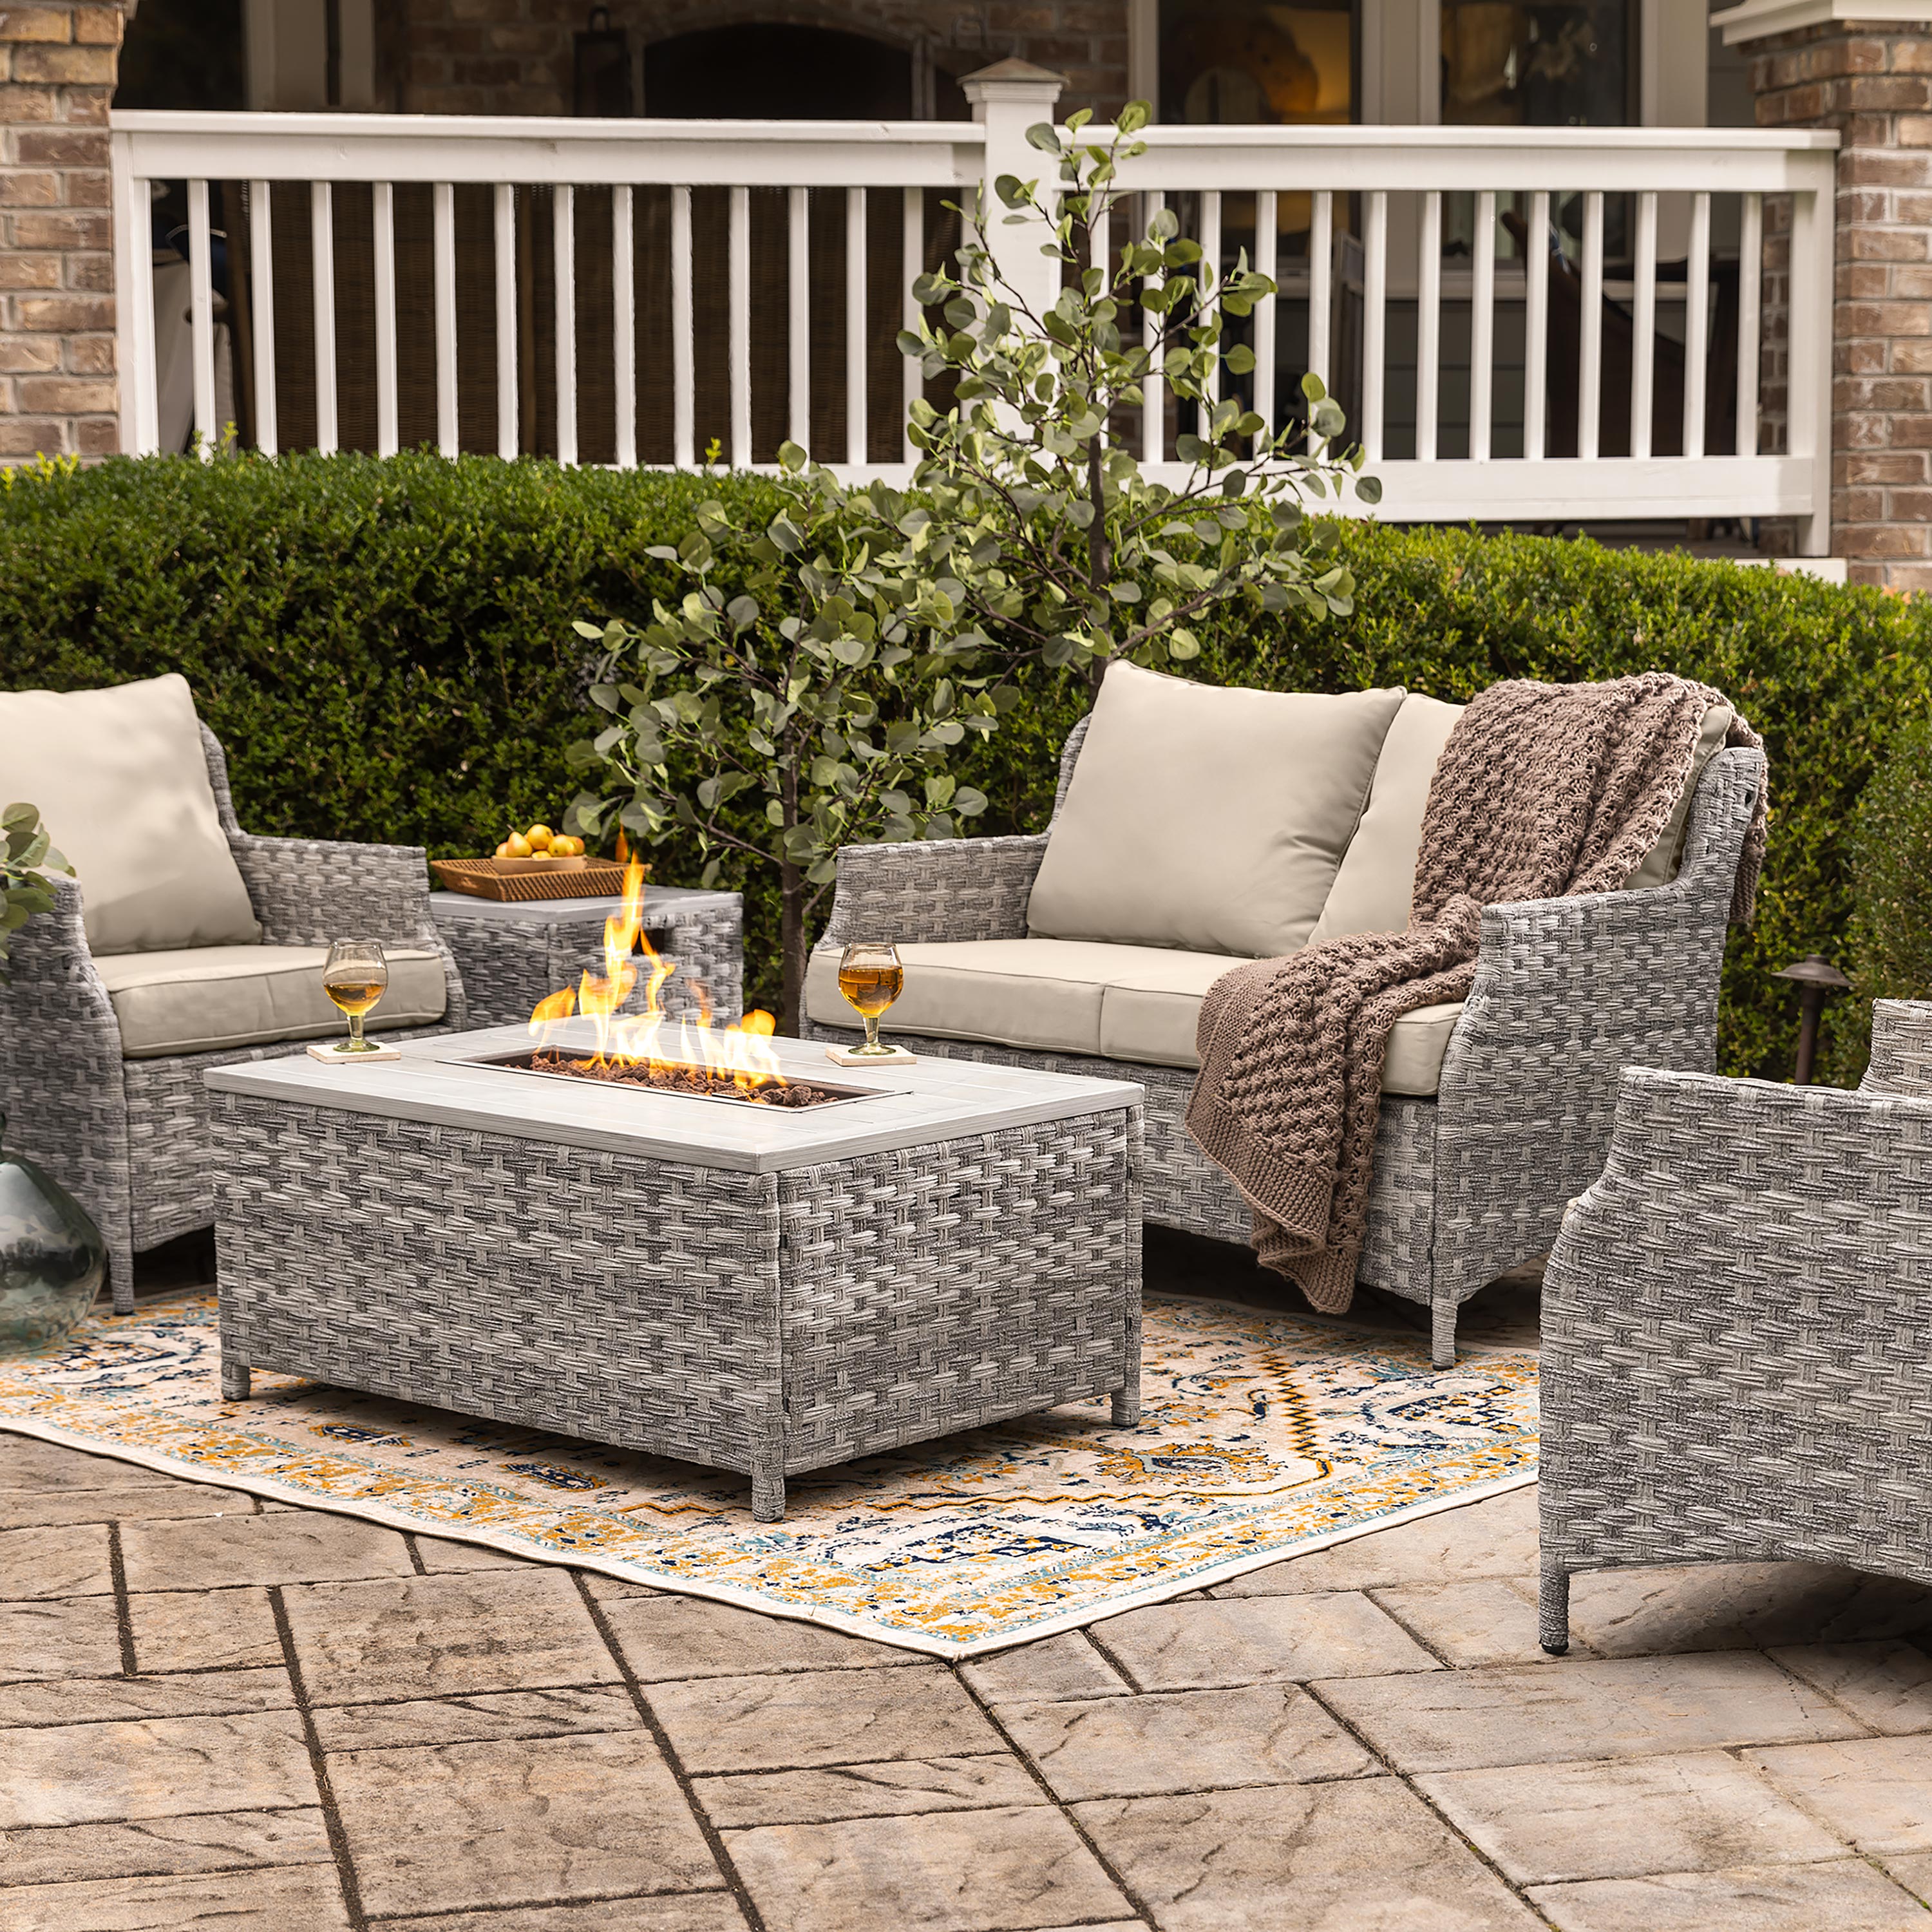 St. Helena Wicker Patio and Fire Pit Seating Set, 5-Piece